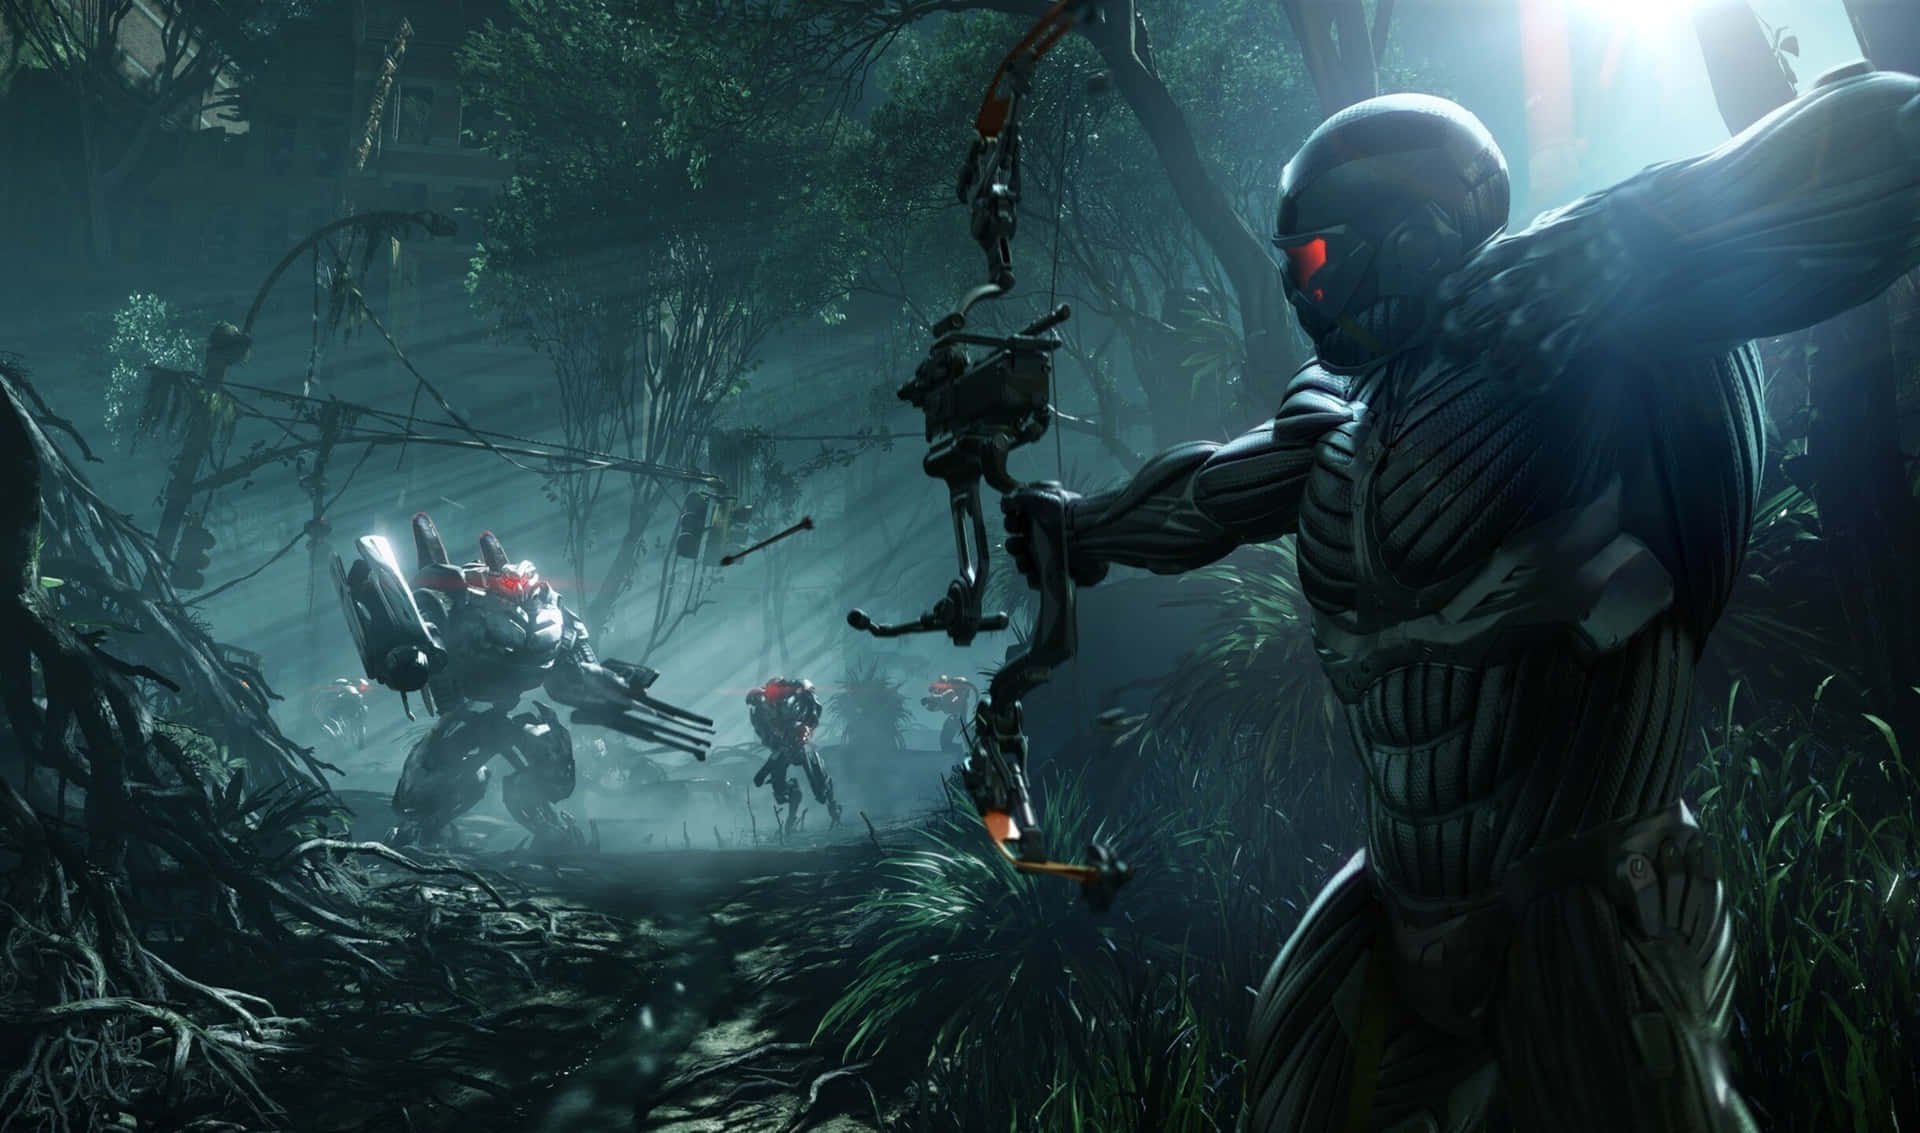 Caption: Intense Action In The Futuristic World Of Crysis 3